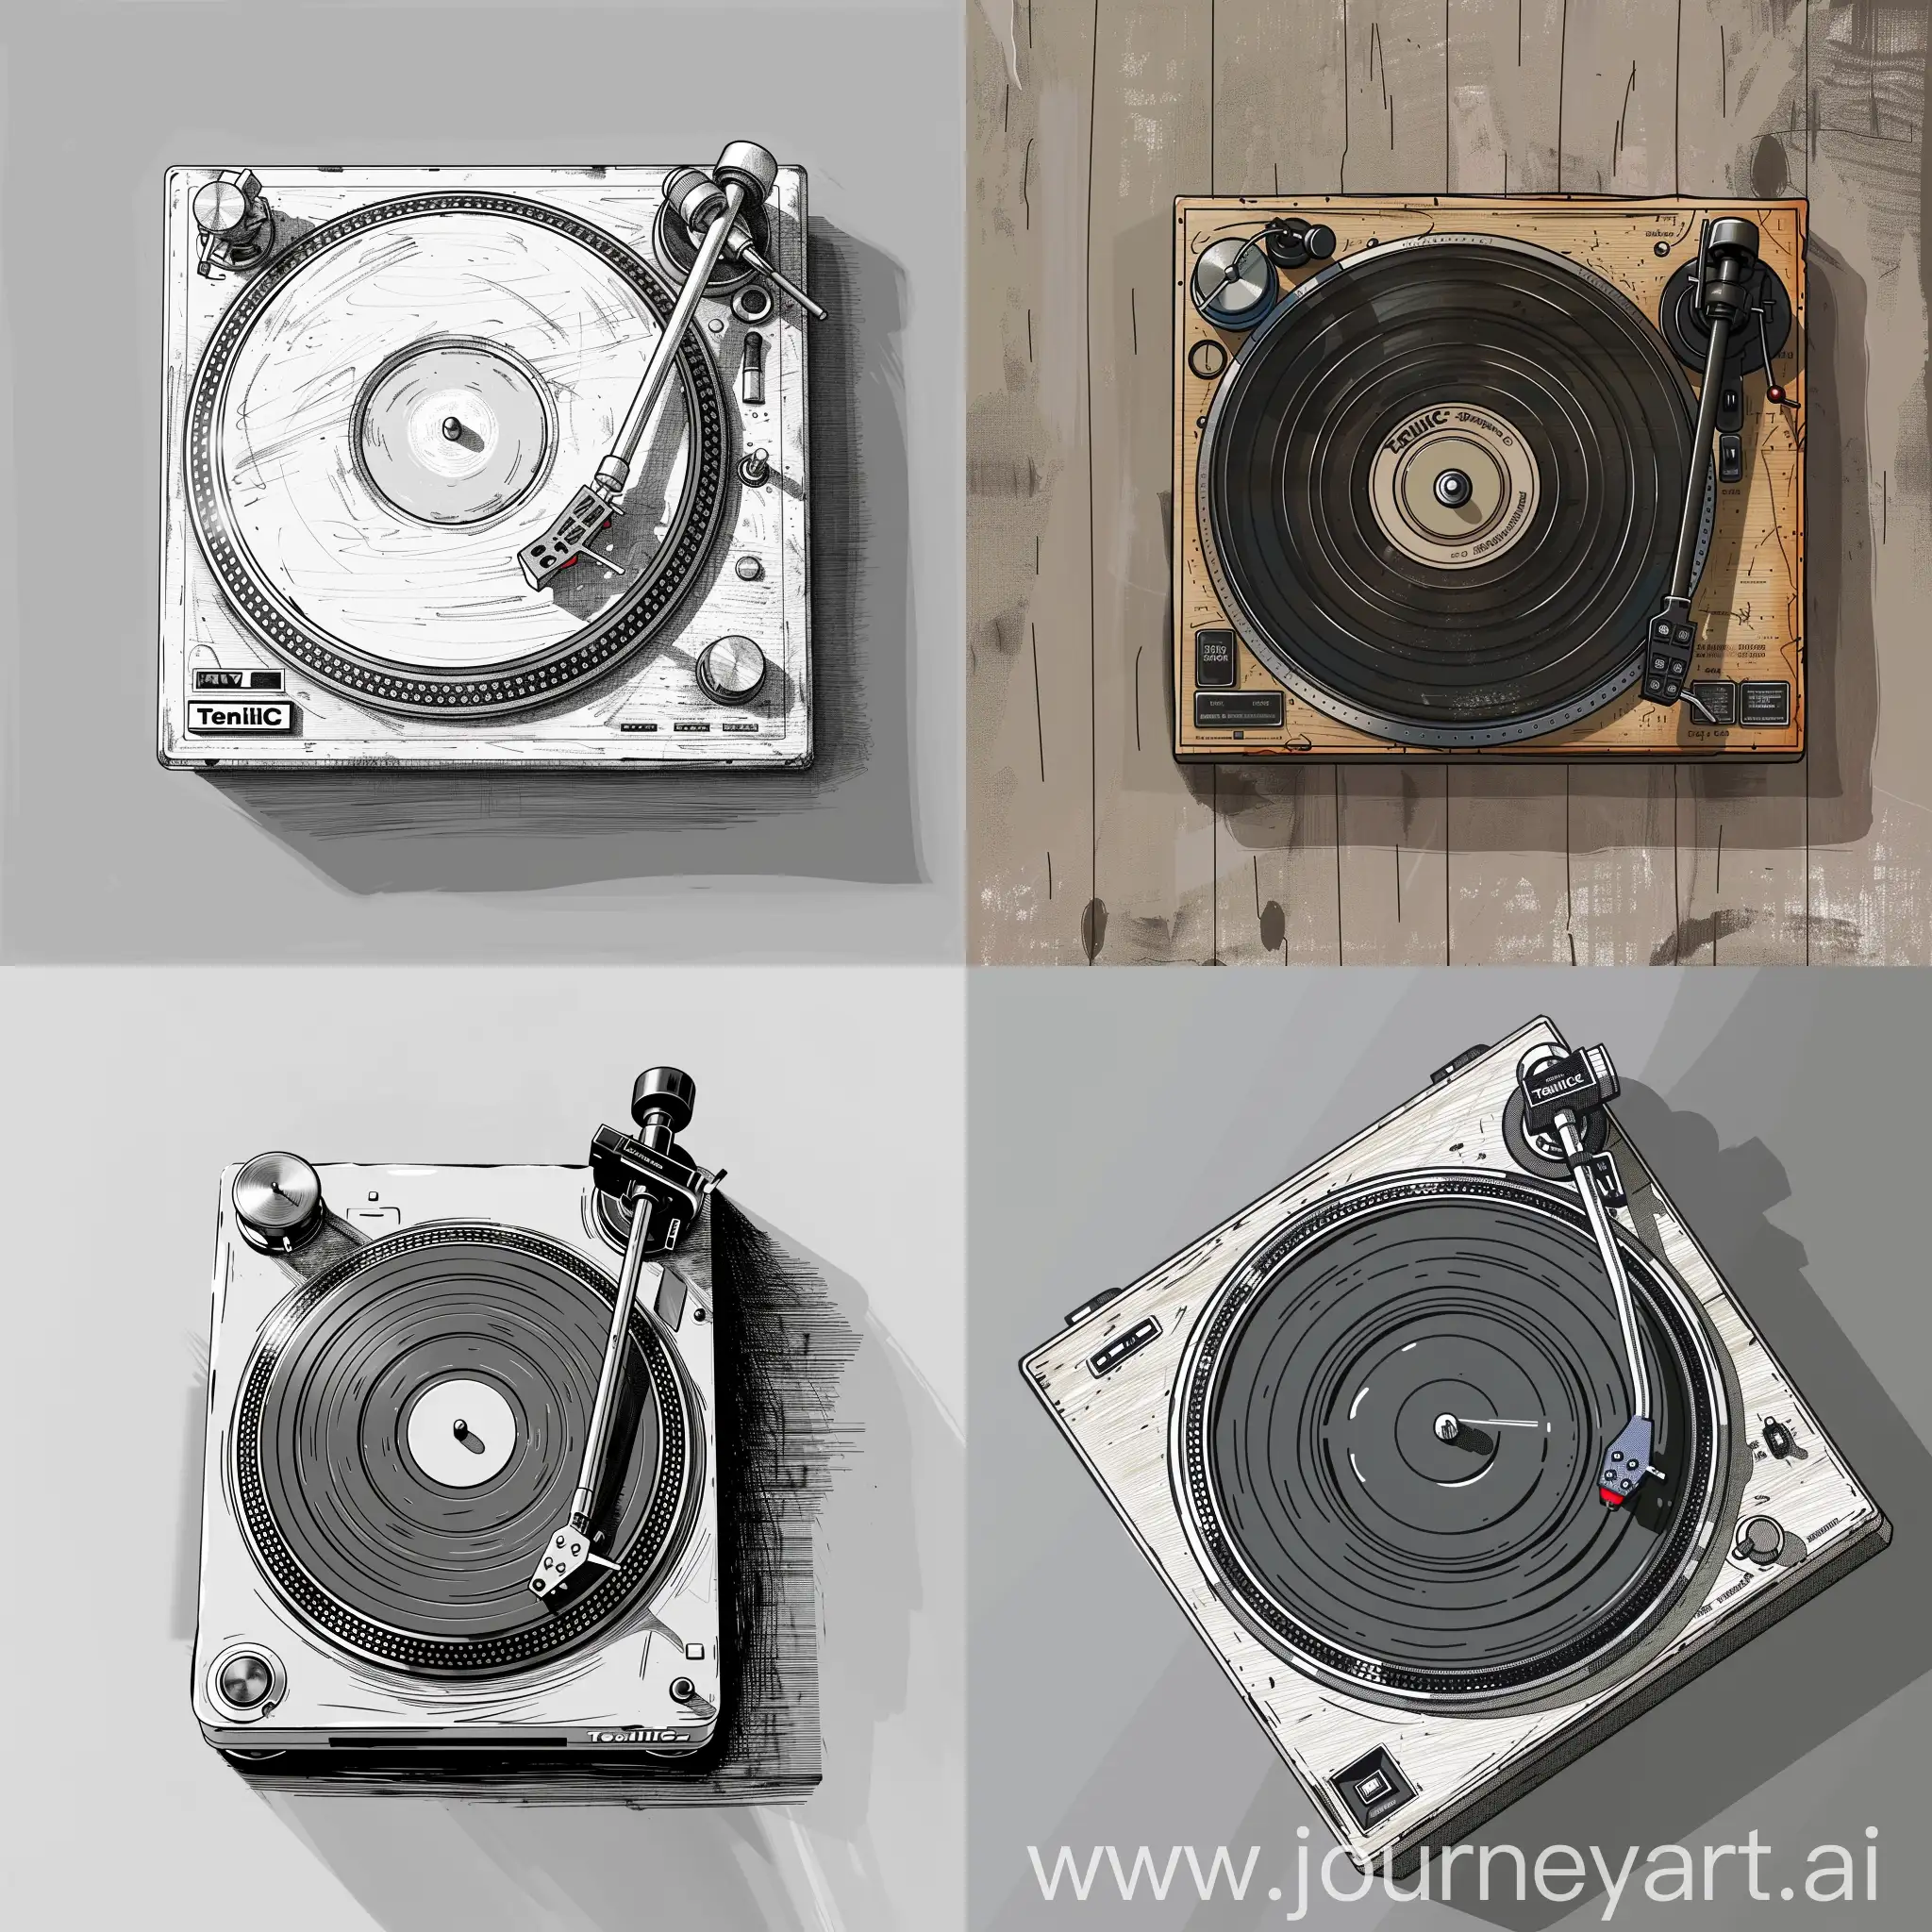 Vintage-Sketch-Design-of-Realistic-Technics-Turntable-from-Above